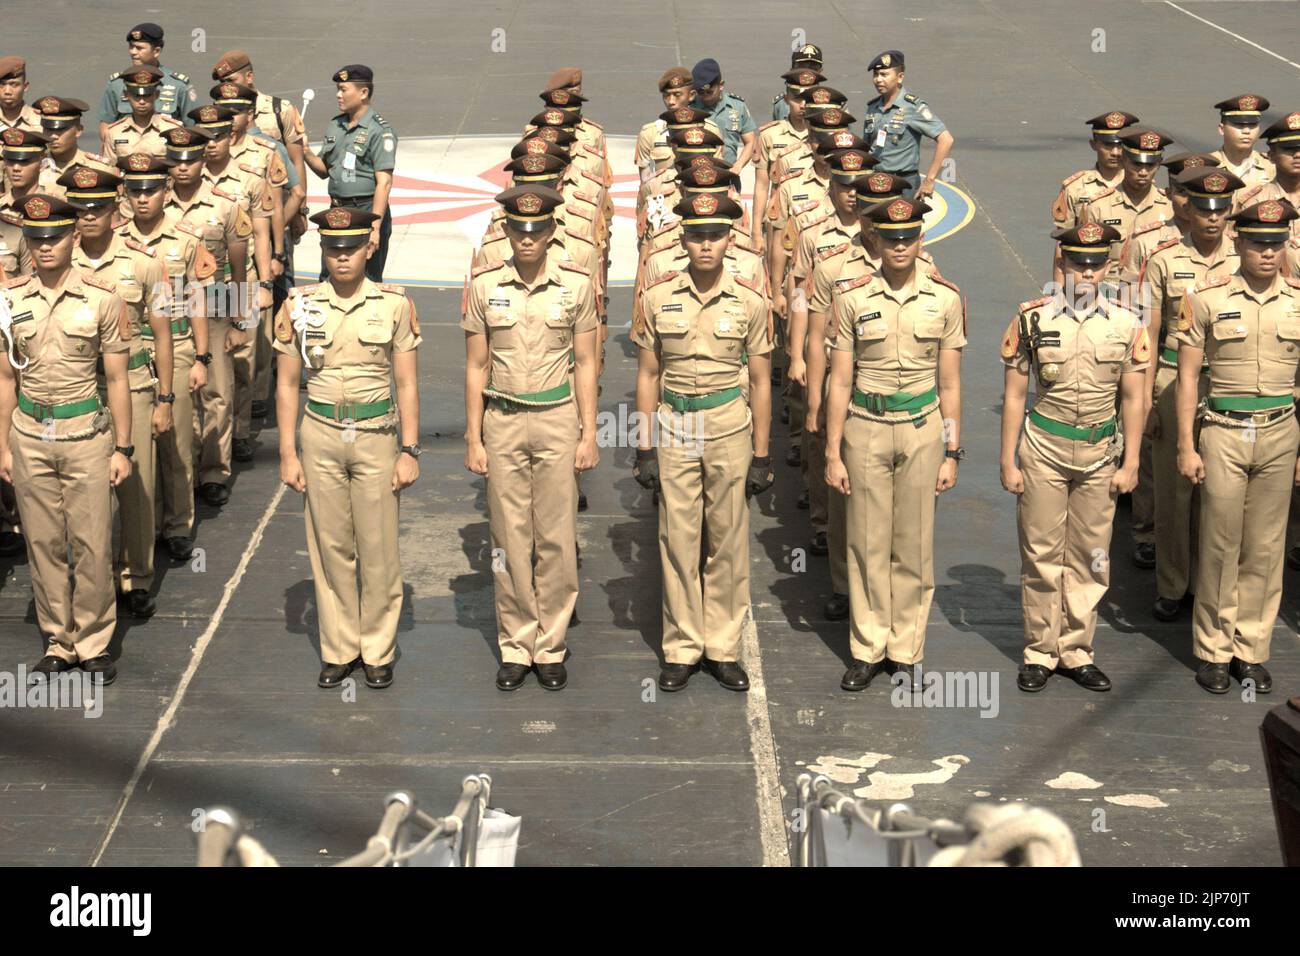 Indonesian navy cadets and officers lining up for a ceremony and briefing, as KRI Dewaruci (Dewa Ruci), an Indonesian tall ship, is opened for public visitors at Kolinlamil harbour (Navy harbour) in Tanjung Priok, North Jakarta, Jakarta, Indonesia. Stock Photo